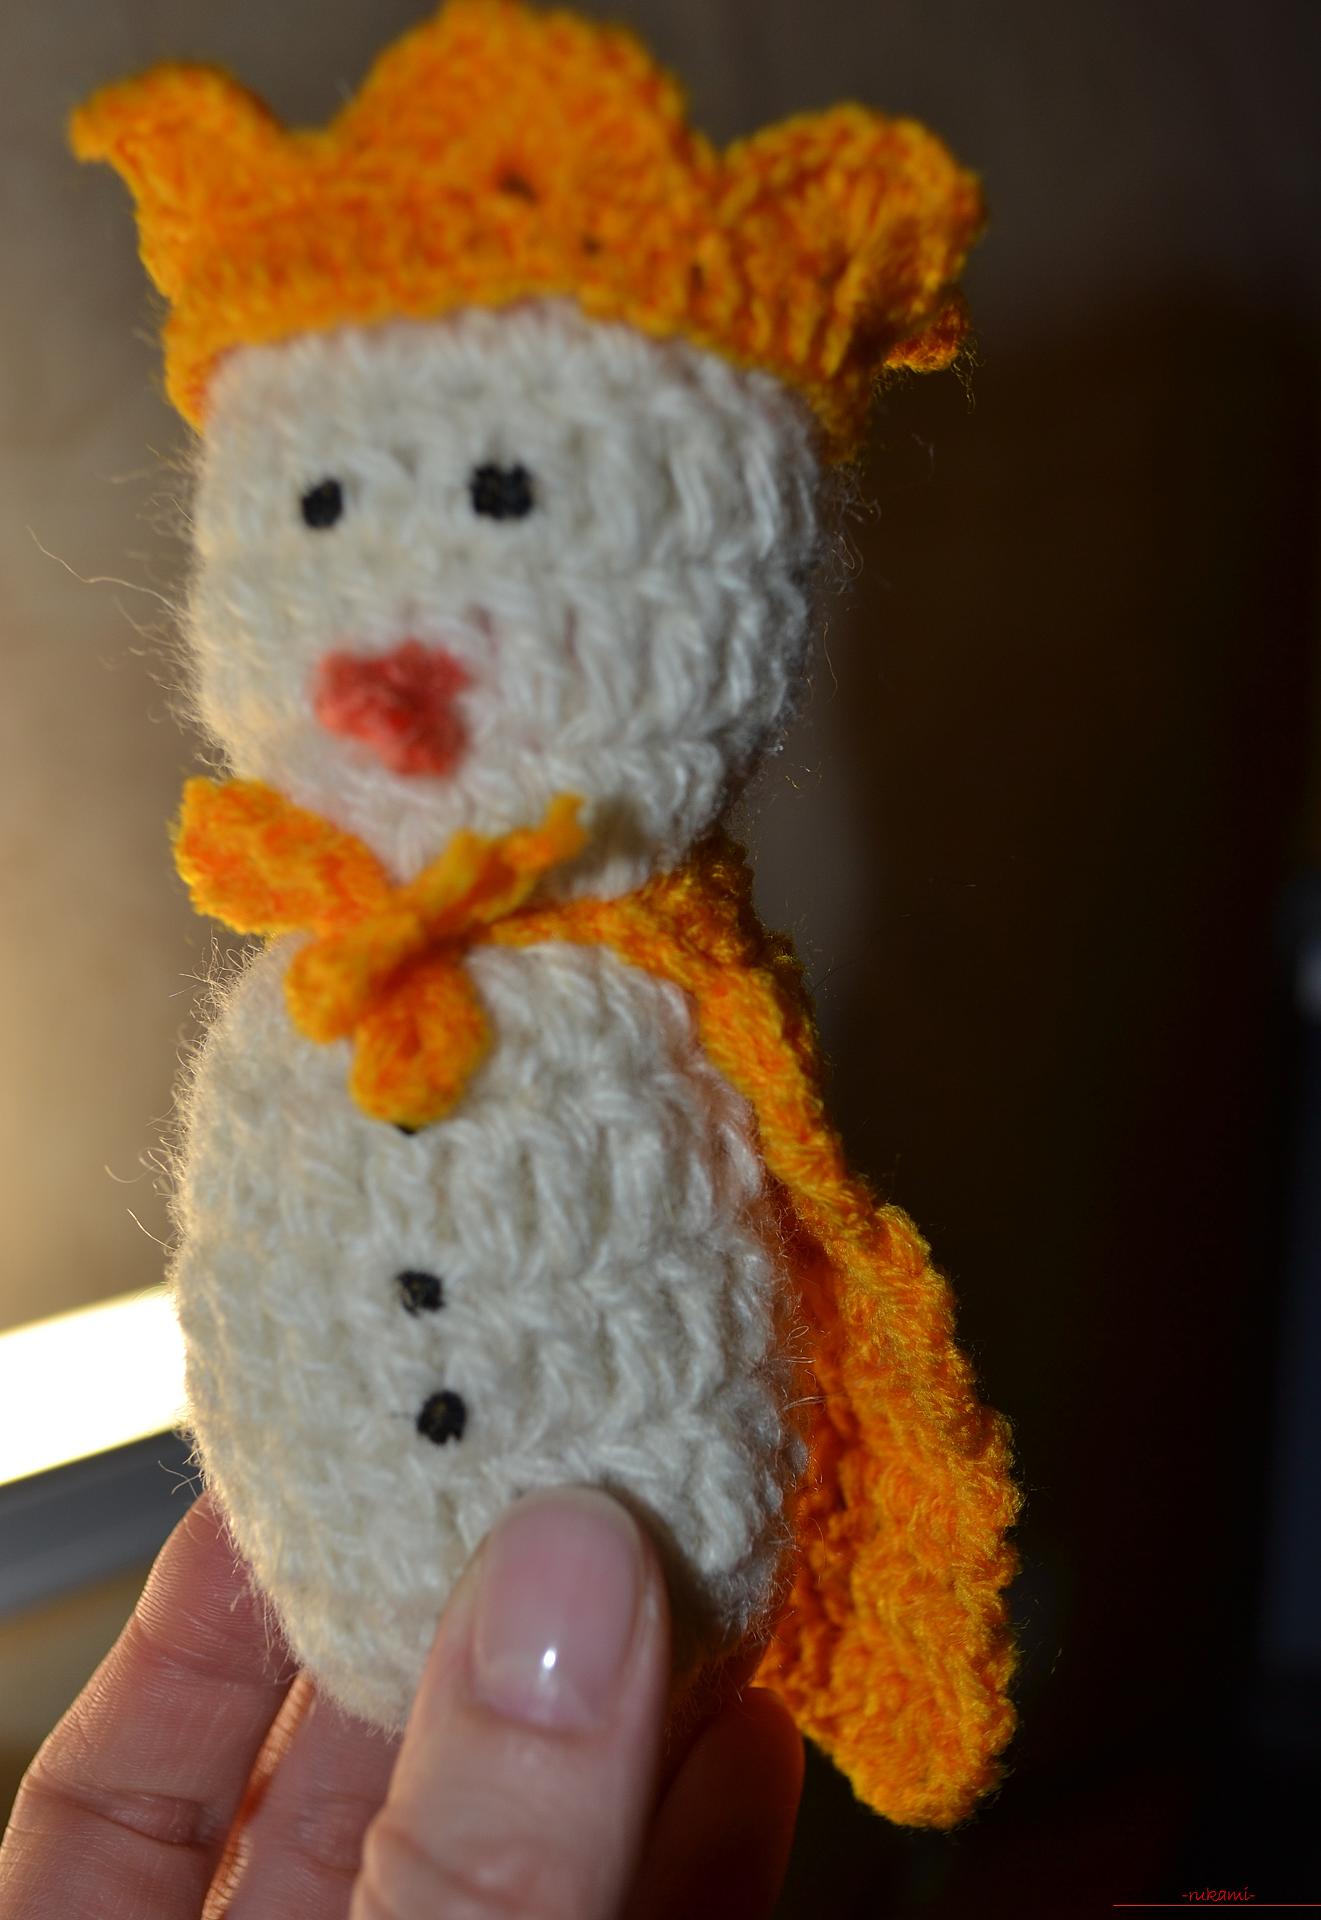 A master class with a photo and description will teach the crocheting of a snowman, which will be understandable for beginners. Photo number 15